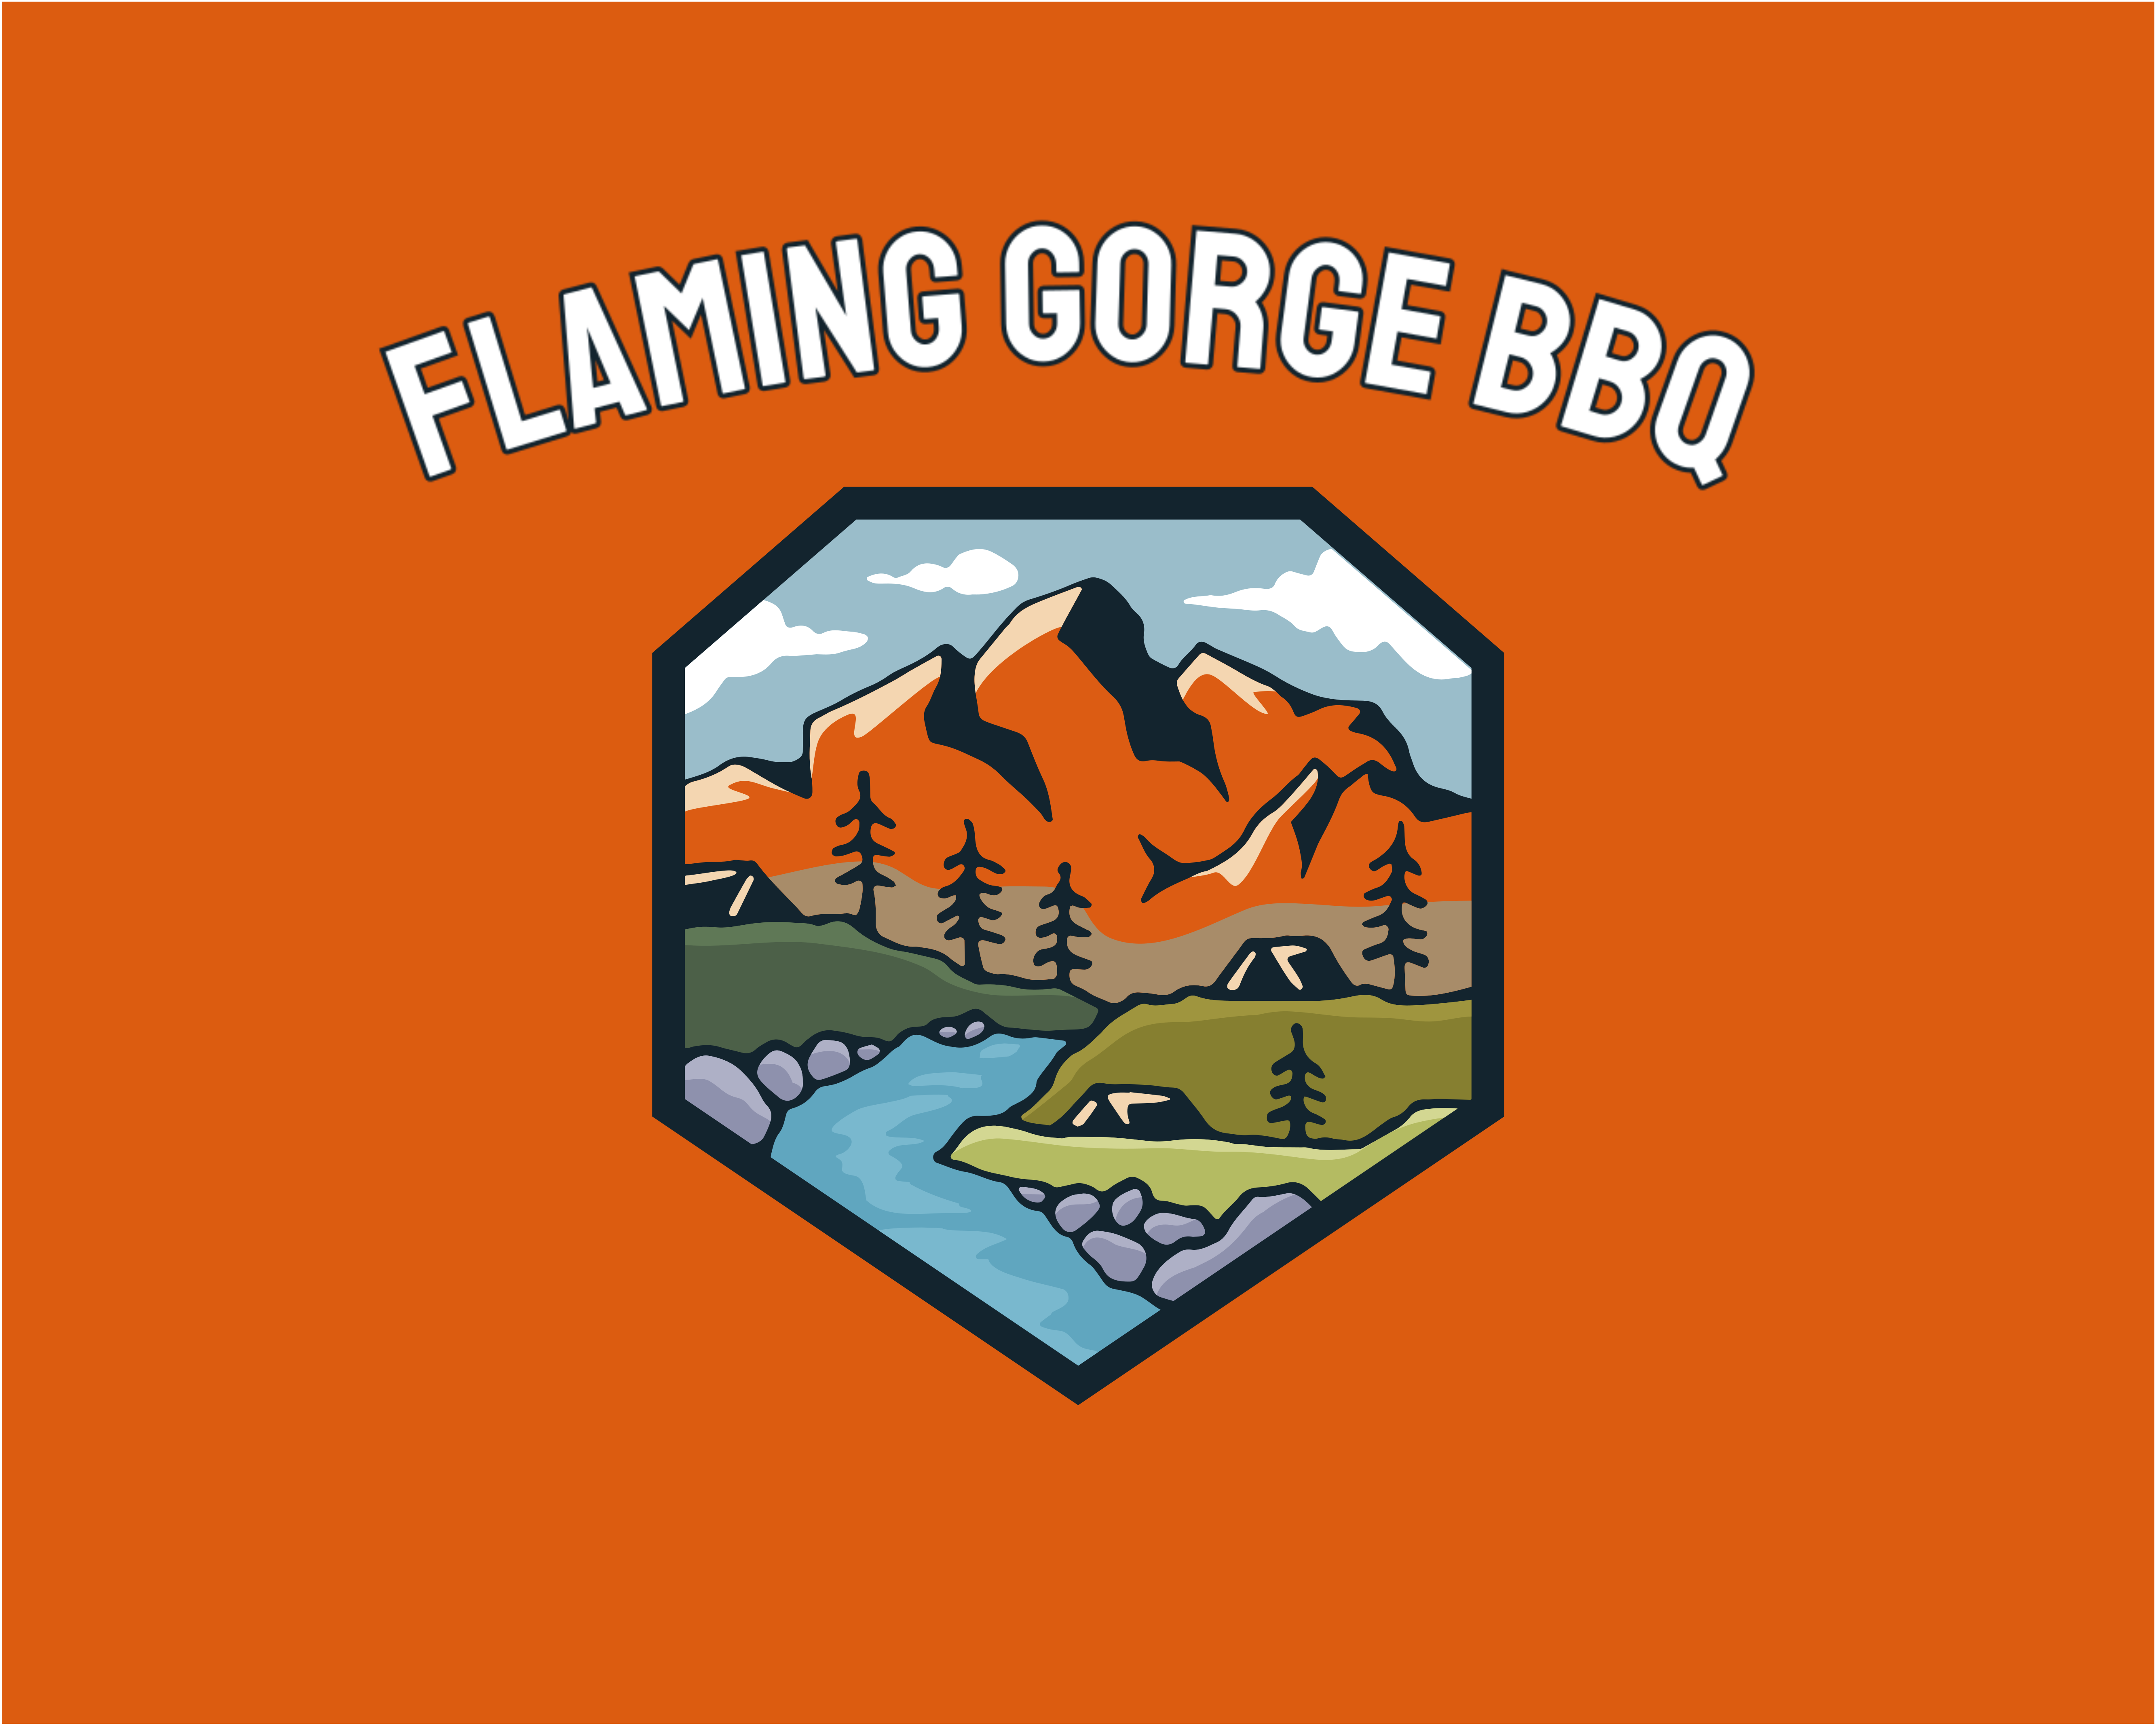 Flaming Gorge BBQ, Tuesday, June 22, 2021, Press release picture